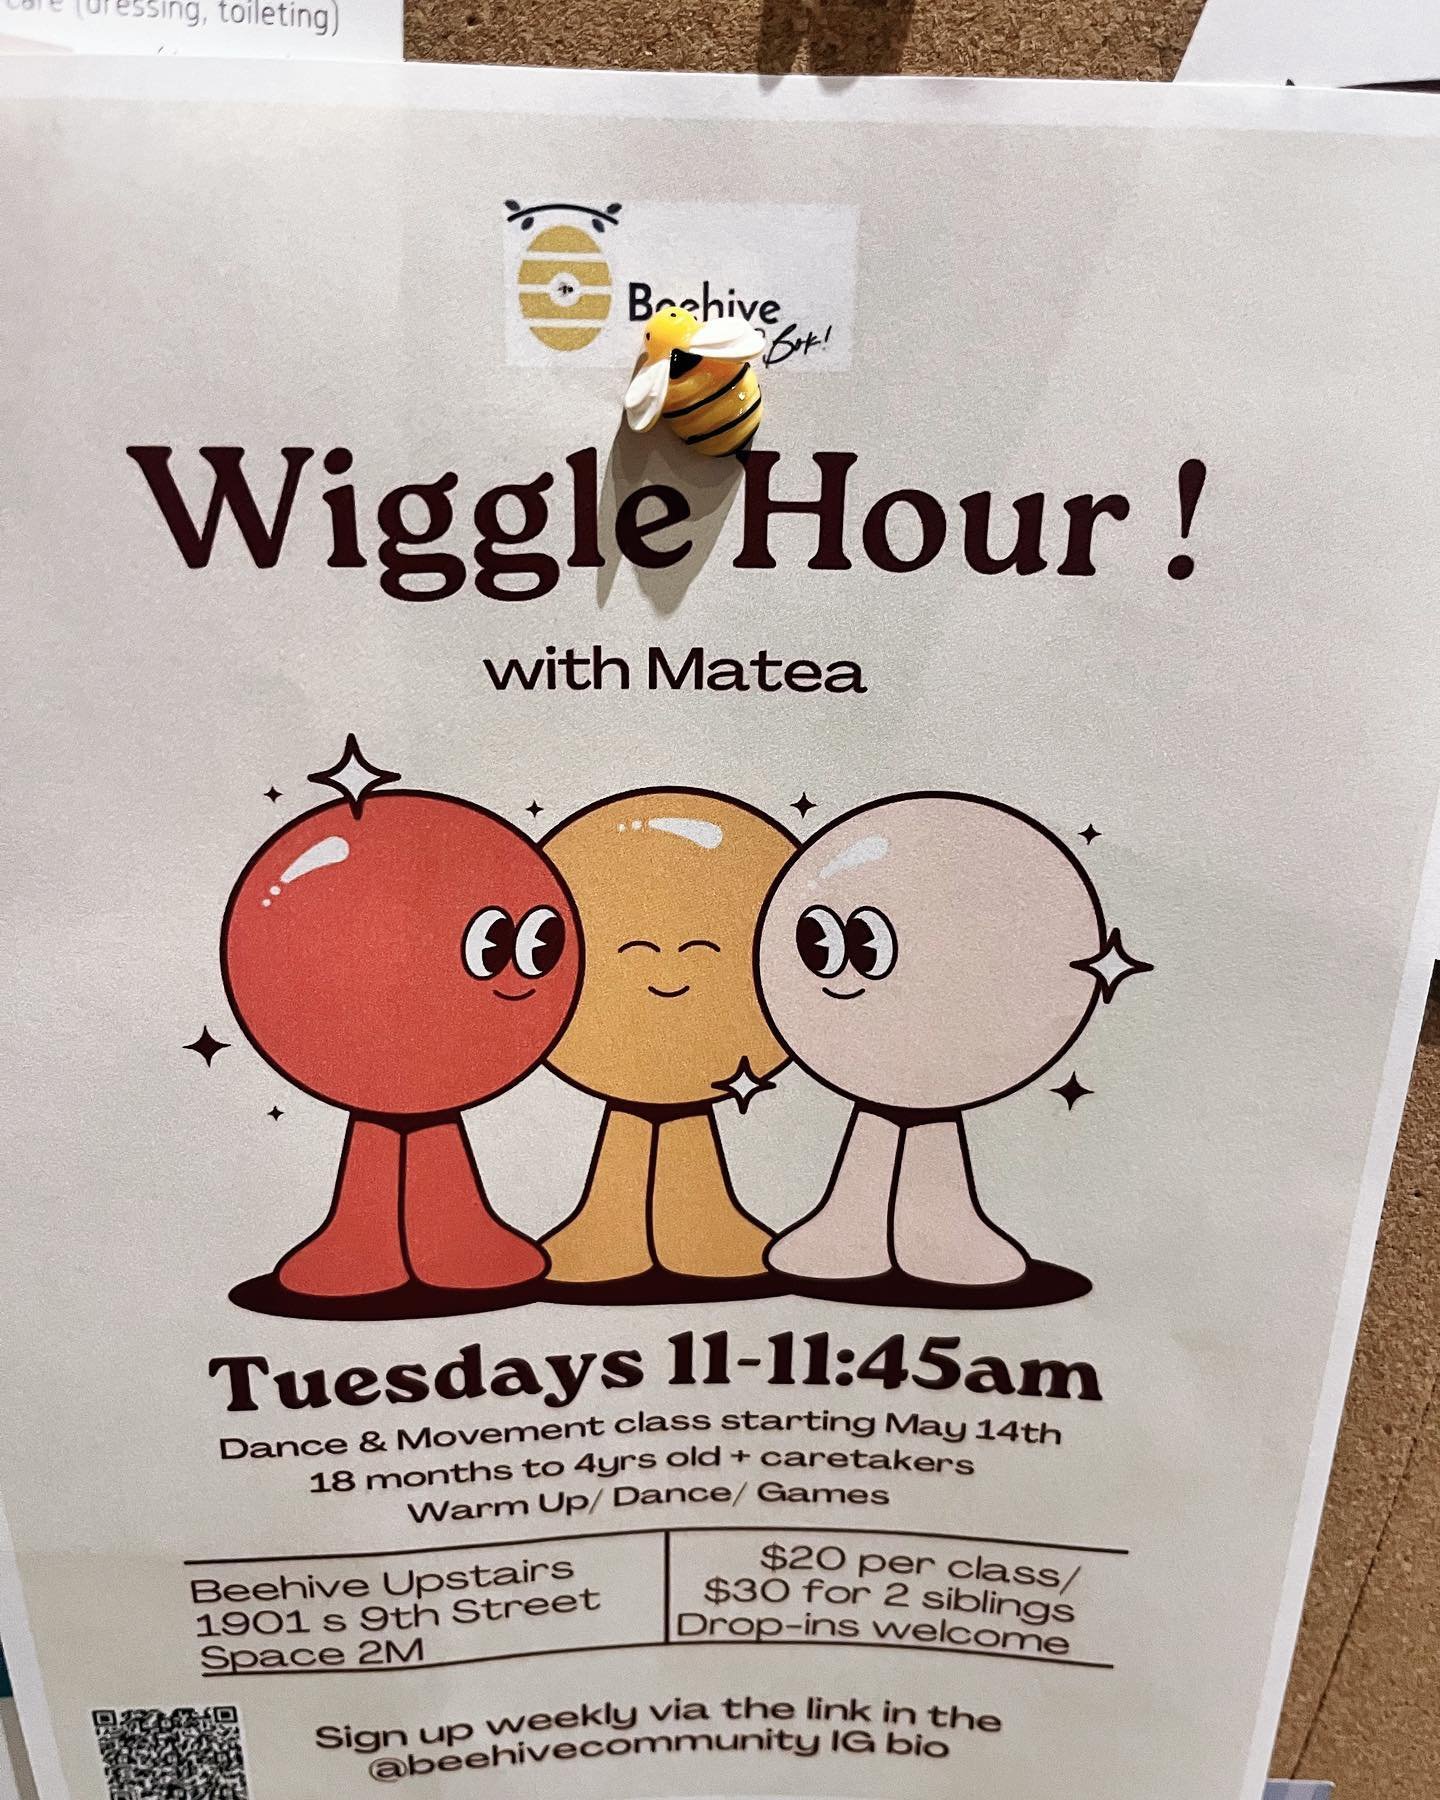 Oooo check out what is new this week!  Wiggle Hour dance class at @beehiveupstairs on Tuesdays at 11! This will be a weekly class until the summer break ❤️

&amp; on May 18 Ms. Sarah is leading a pop-up Theater Class for 5-8 year olds at 2 and for 4-